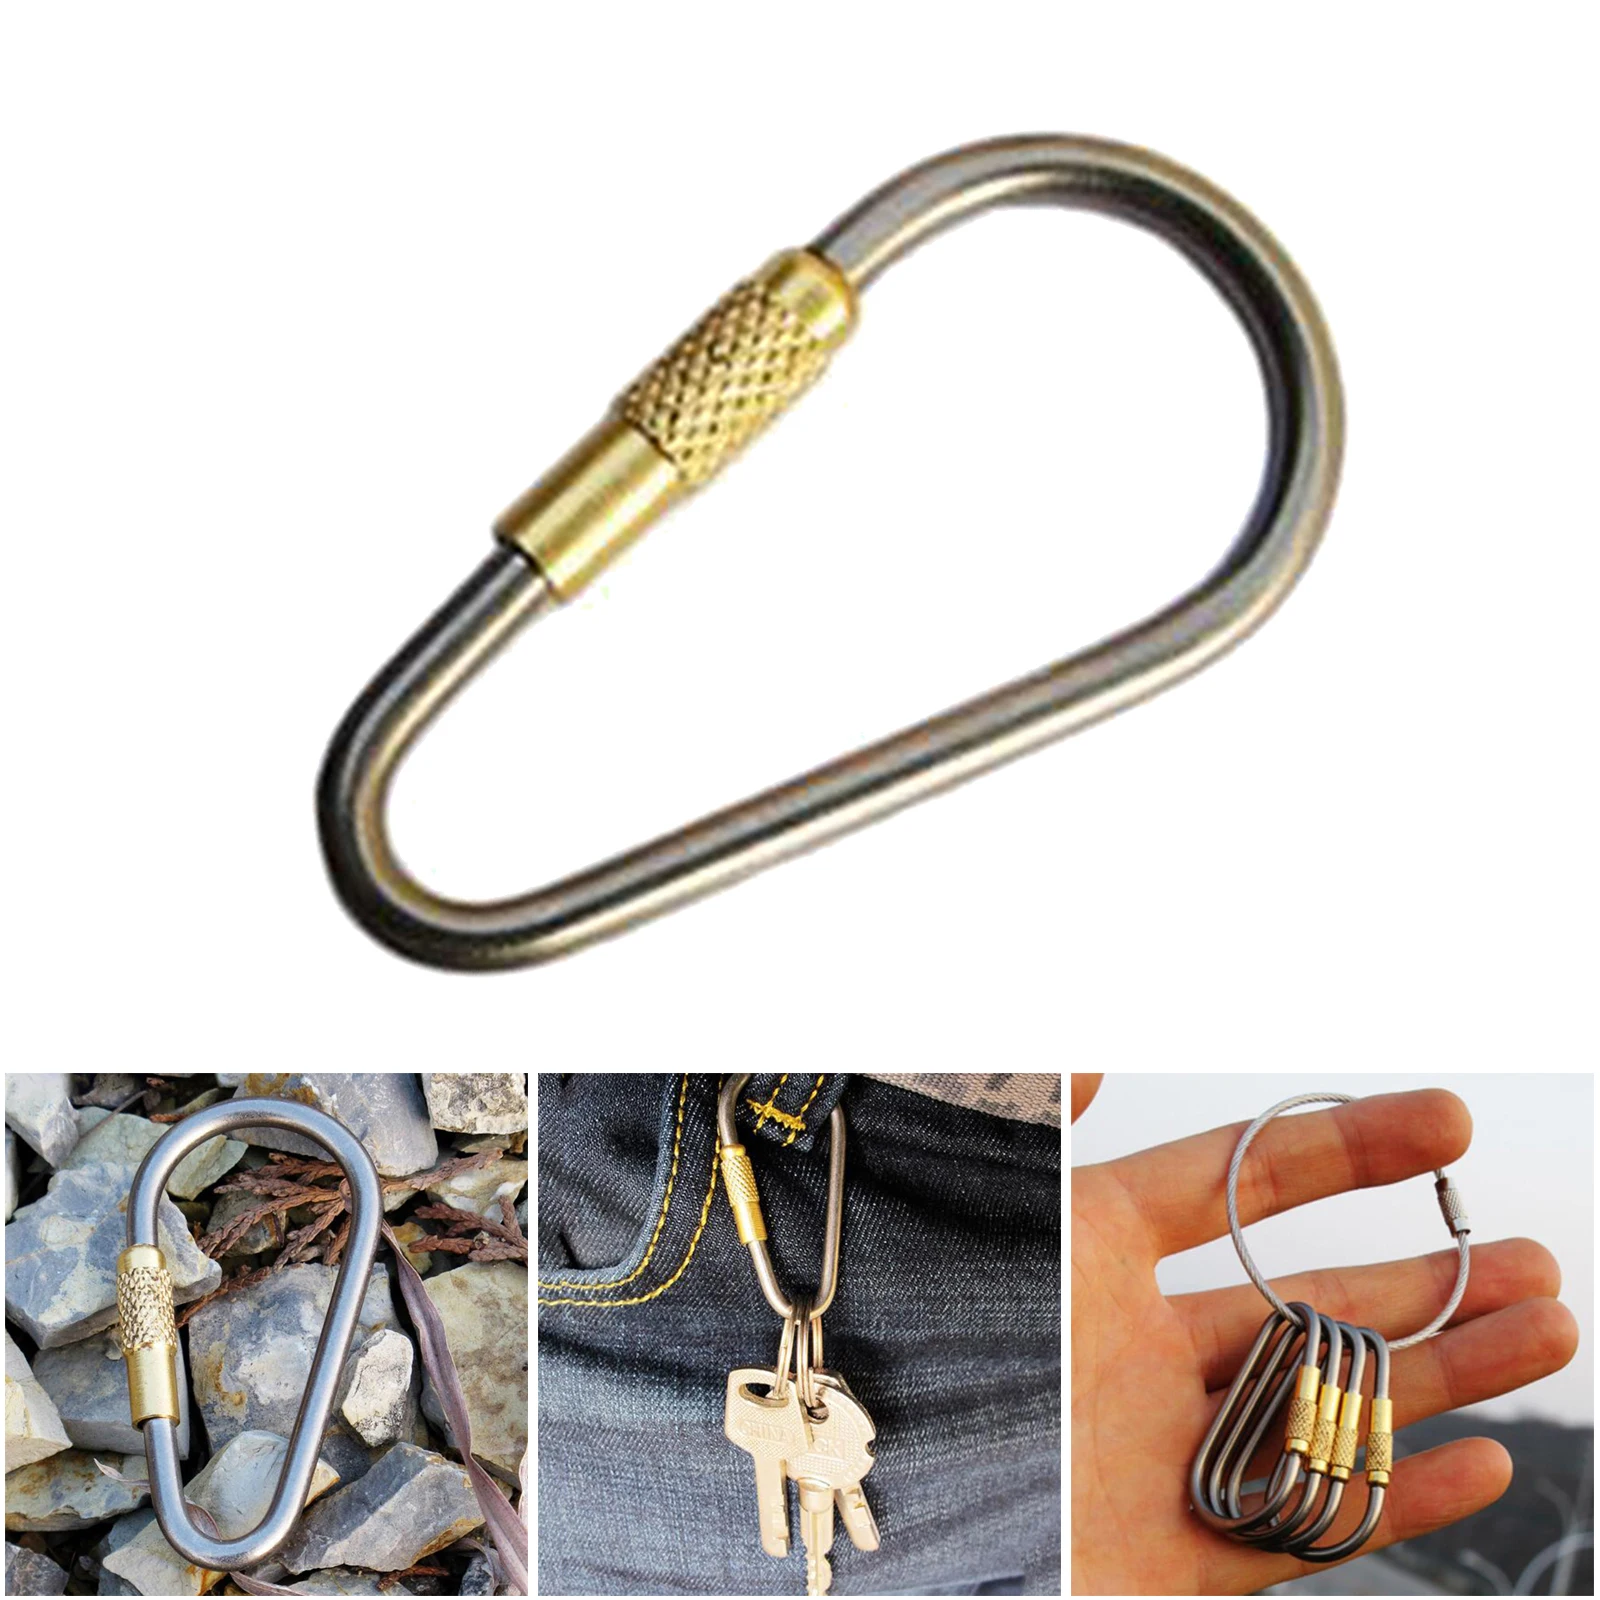 Screw Locking Carabiner Clips Small Titanium Alloy D-Ring Hooks, Dog Leads, Keys, Belts, Water Bottle, Camping, Backpack Buckle